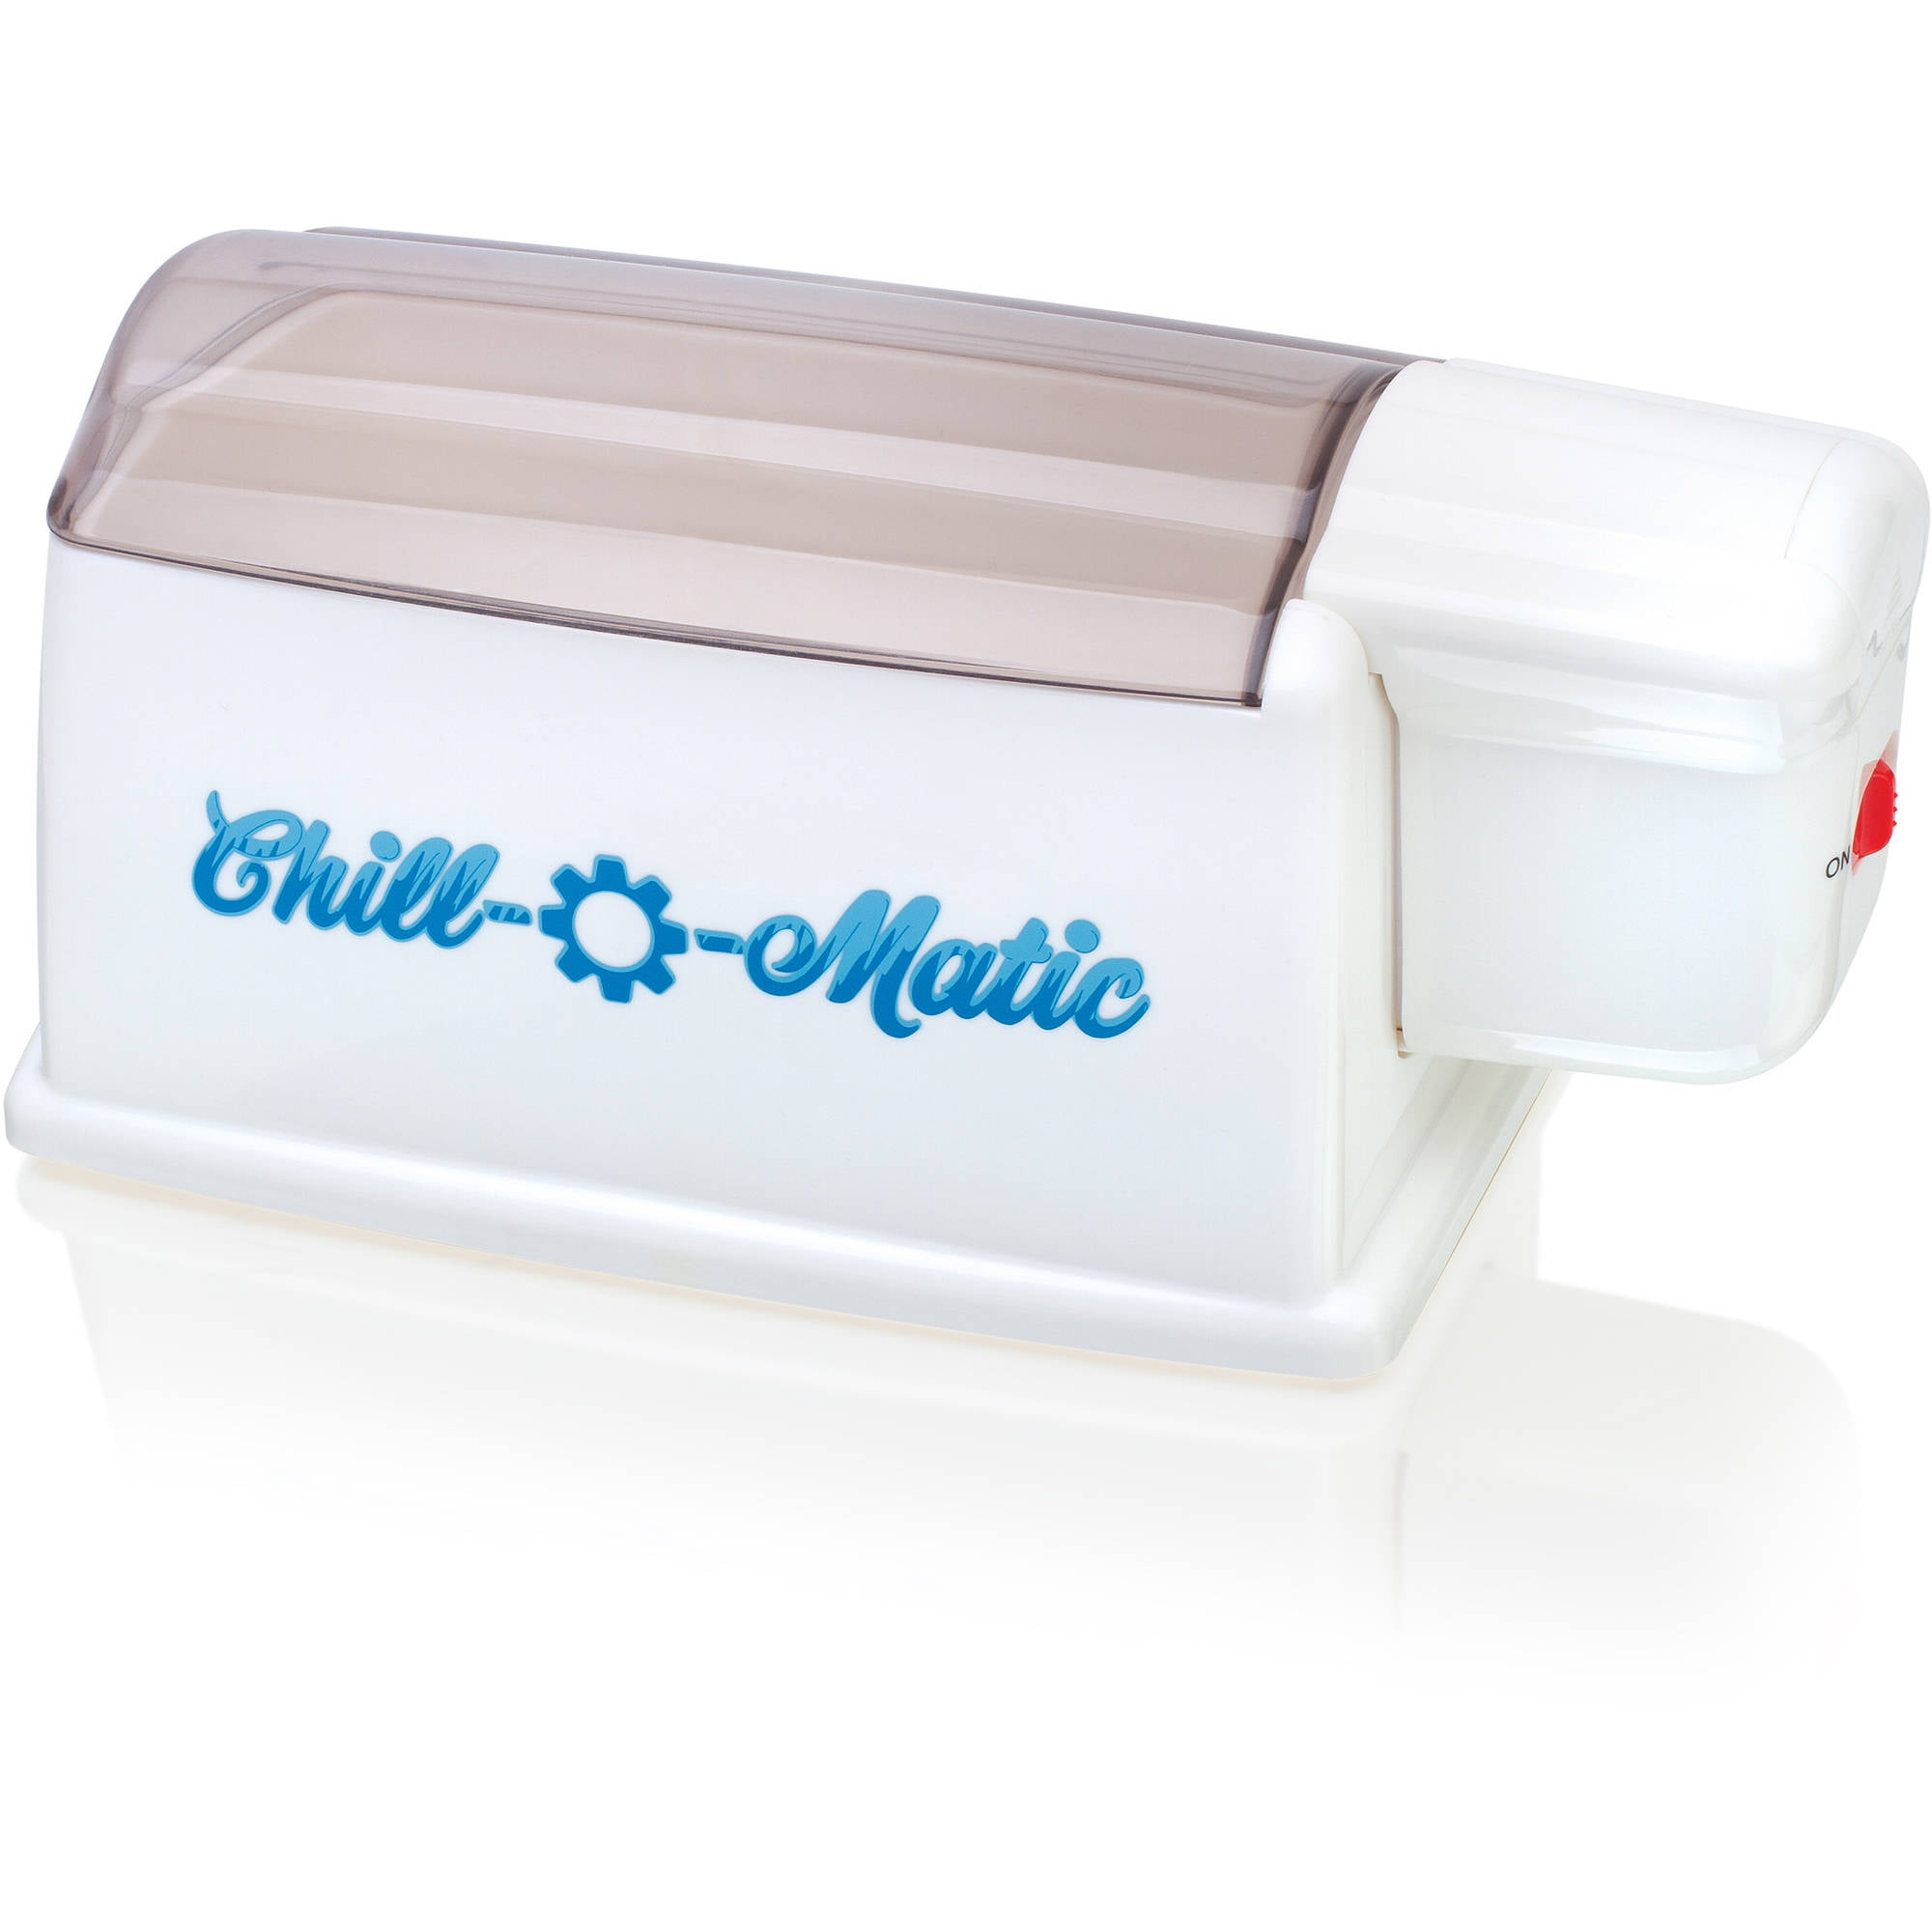 Chill-O-Matic Instant Beverage Cooler, White